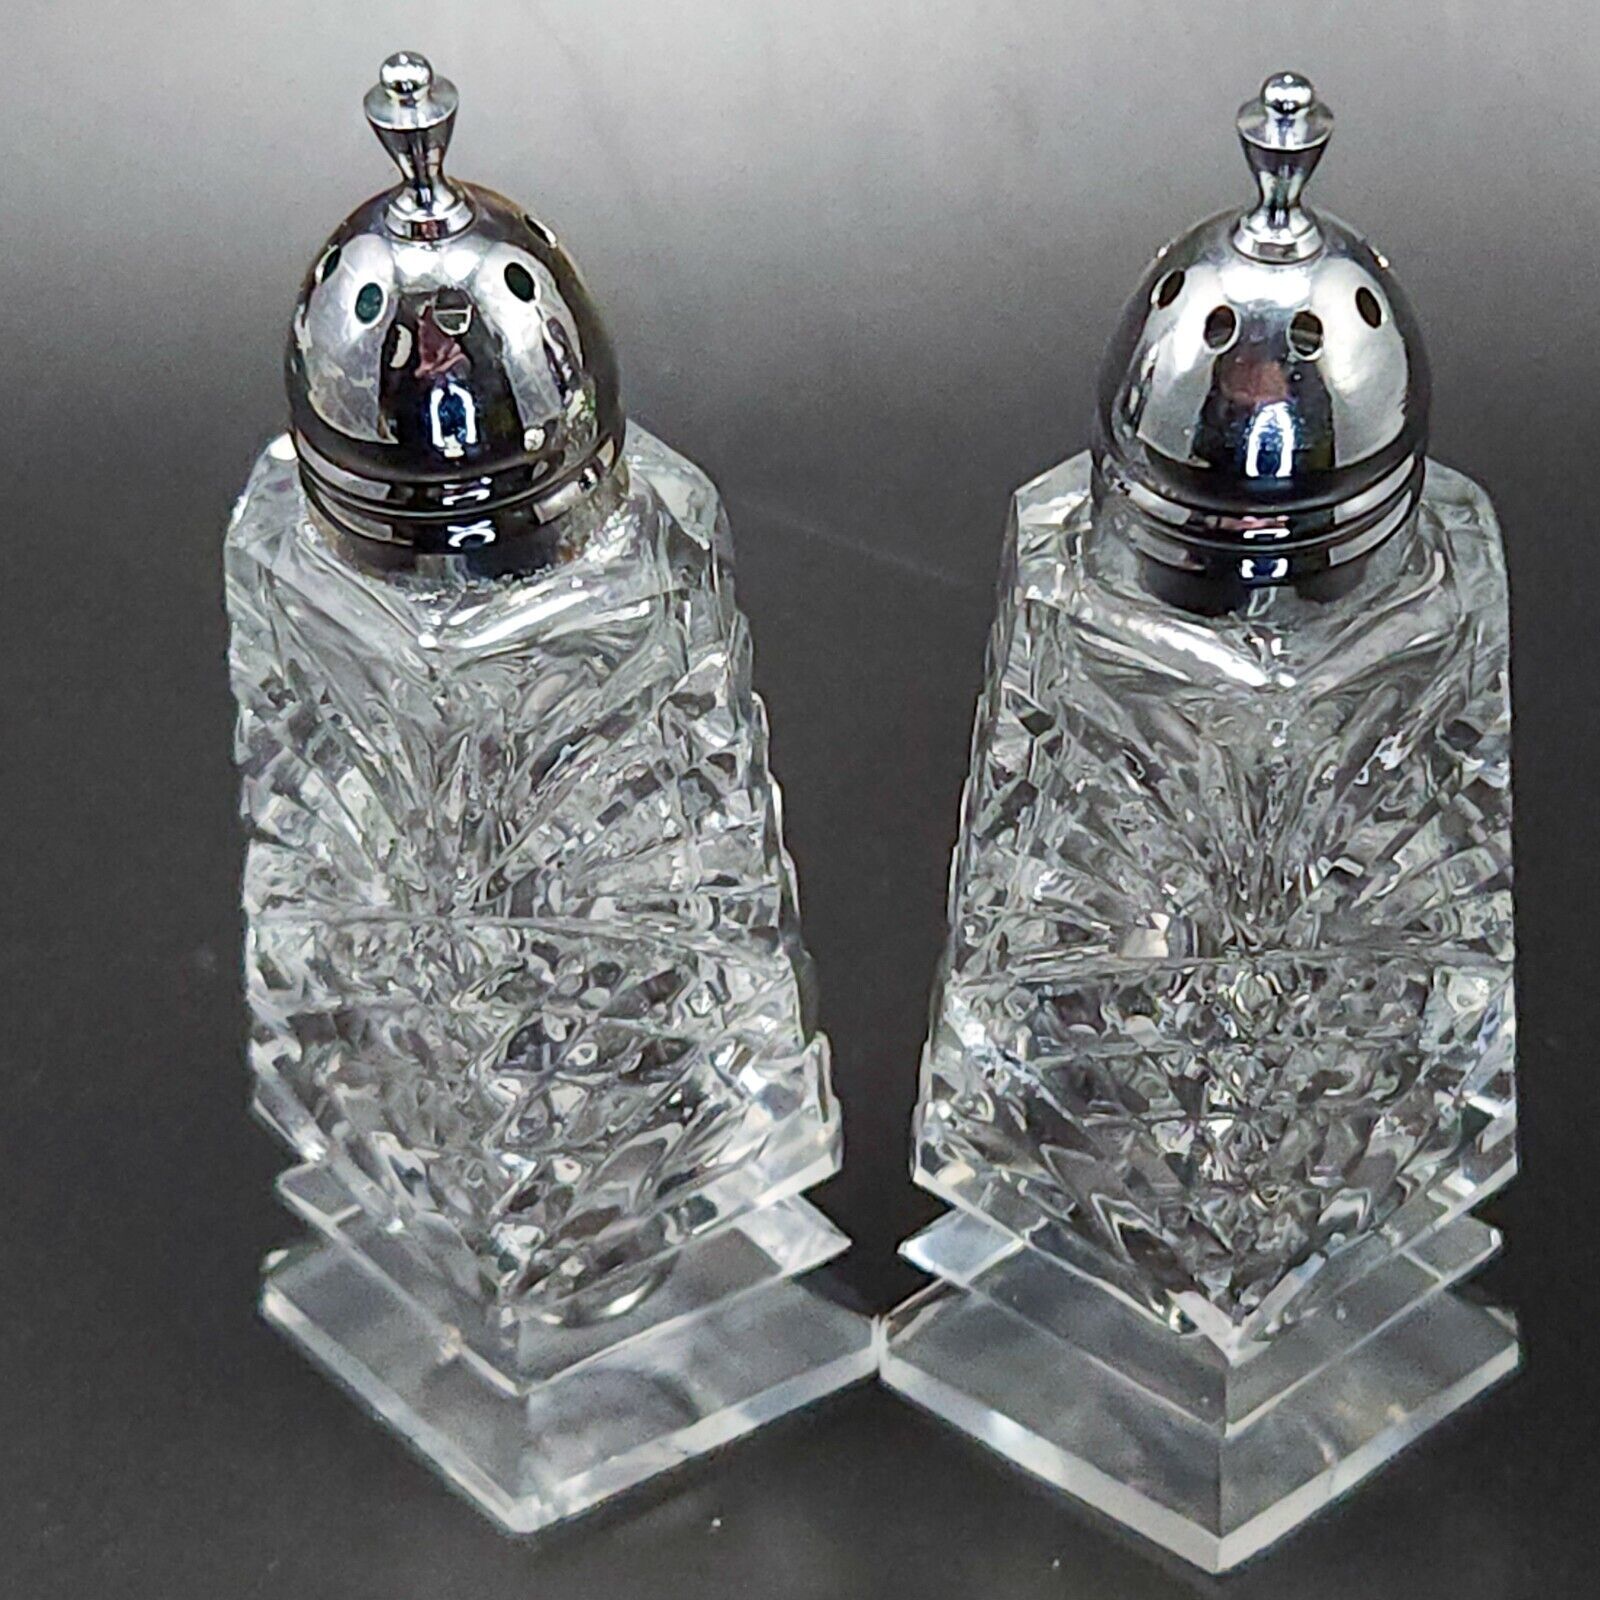 Primary image for Clear Glass Footed Salt and Pepper Shakers 4in Diamond Shape Criss-Cross and Fan